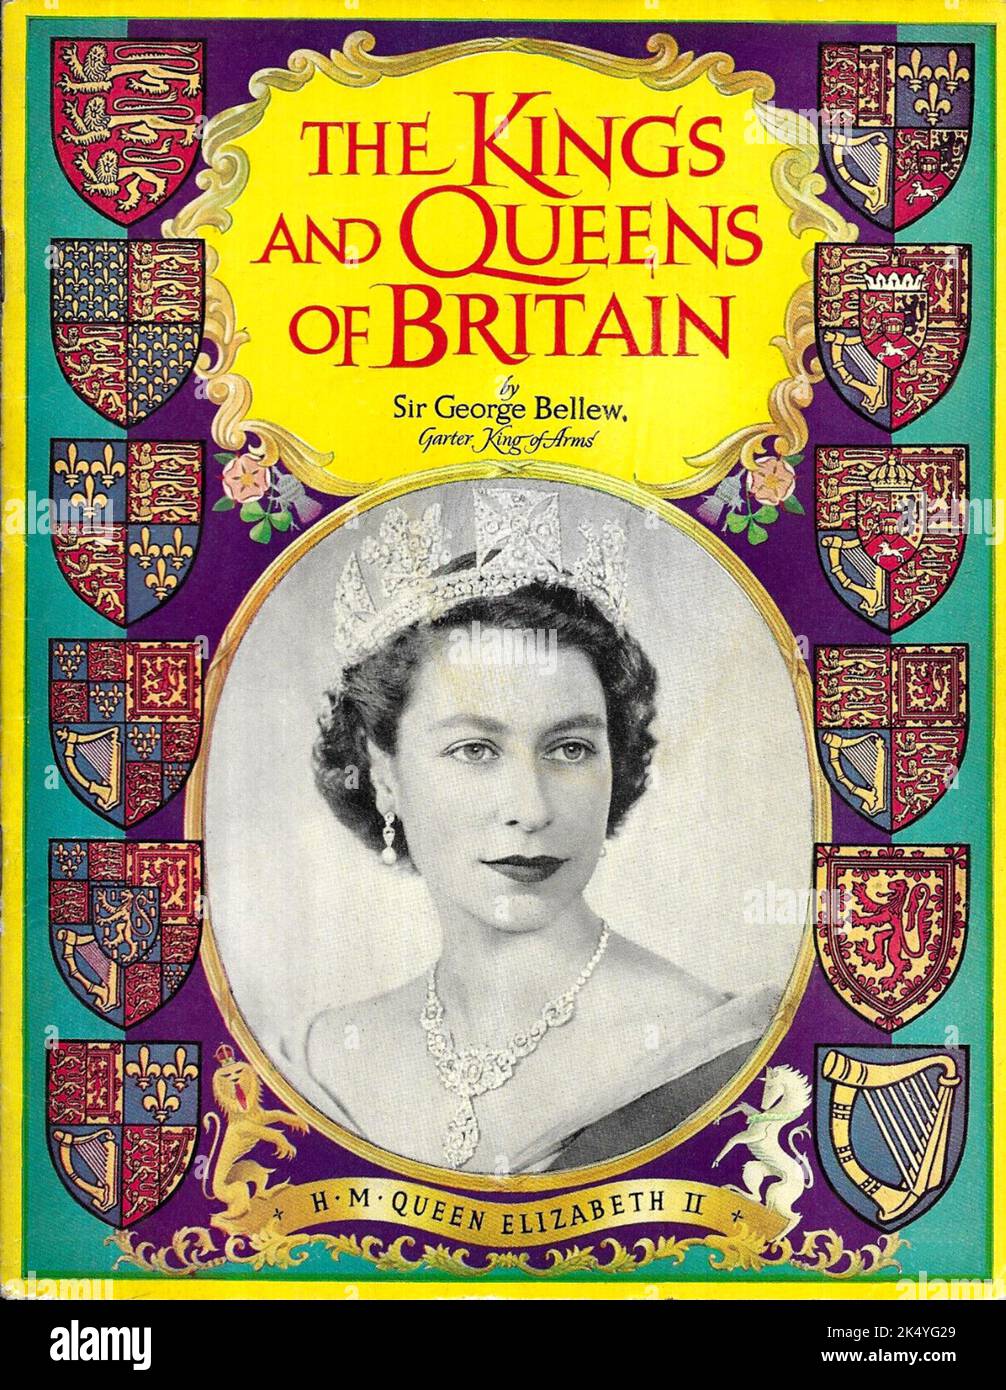 1953 , june , London , GREAT BRITAIN : The  coronation day of Queen ELIZABETH II of ENGLAND ( 1926 - 2022 ) saw the publication of many illustrative booklets with the history of all the rulers of the United Kingdom listed from the beginning : THE KINGS AND QUEENS OF BRITAIN by Sir George Bellew ( Garter King of Arms ). Unknown illustrator . - HERALDRY - ARALDICA - REGINA - RE - REALI - ROYALTY - nobili - nobiltà inglese - nobility - GRAND BRETAGNA - INGHILTERRA - WINDSOR - House of Saxe-Coburg-Gotha - CORONATION -  INCORONAZIONE  - ROYAL FAMILY - FAMIGLIA REALE - cover - book - libro - coperti Stock Photo